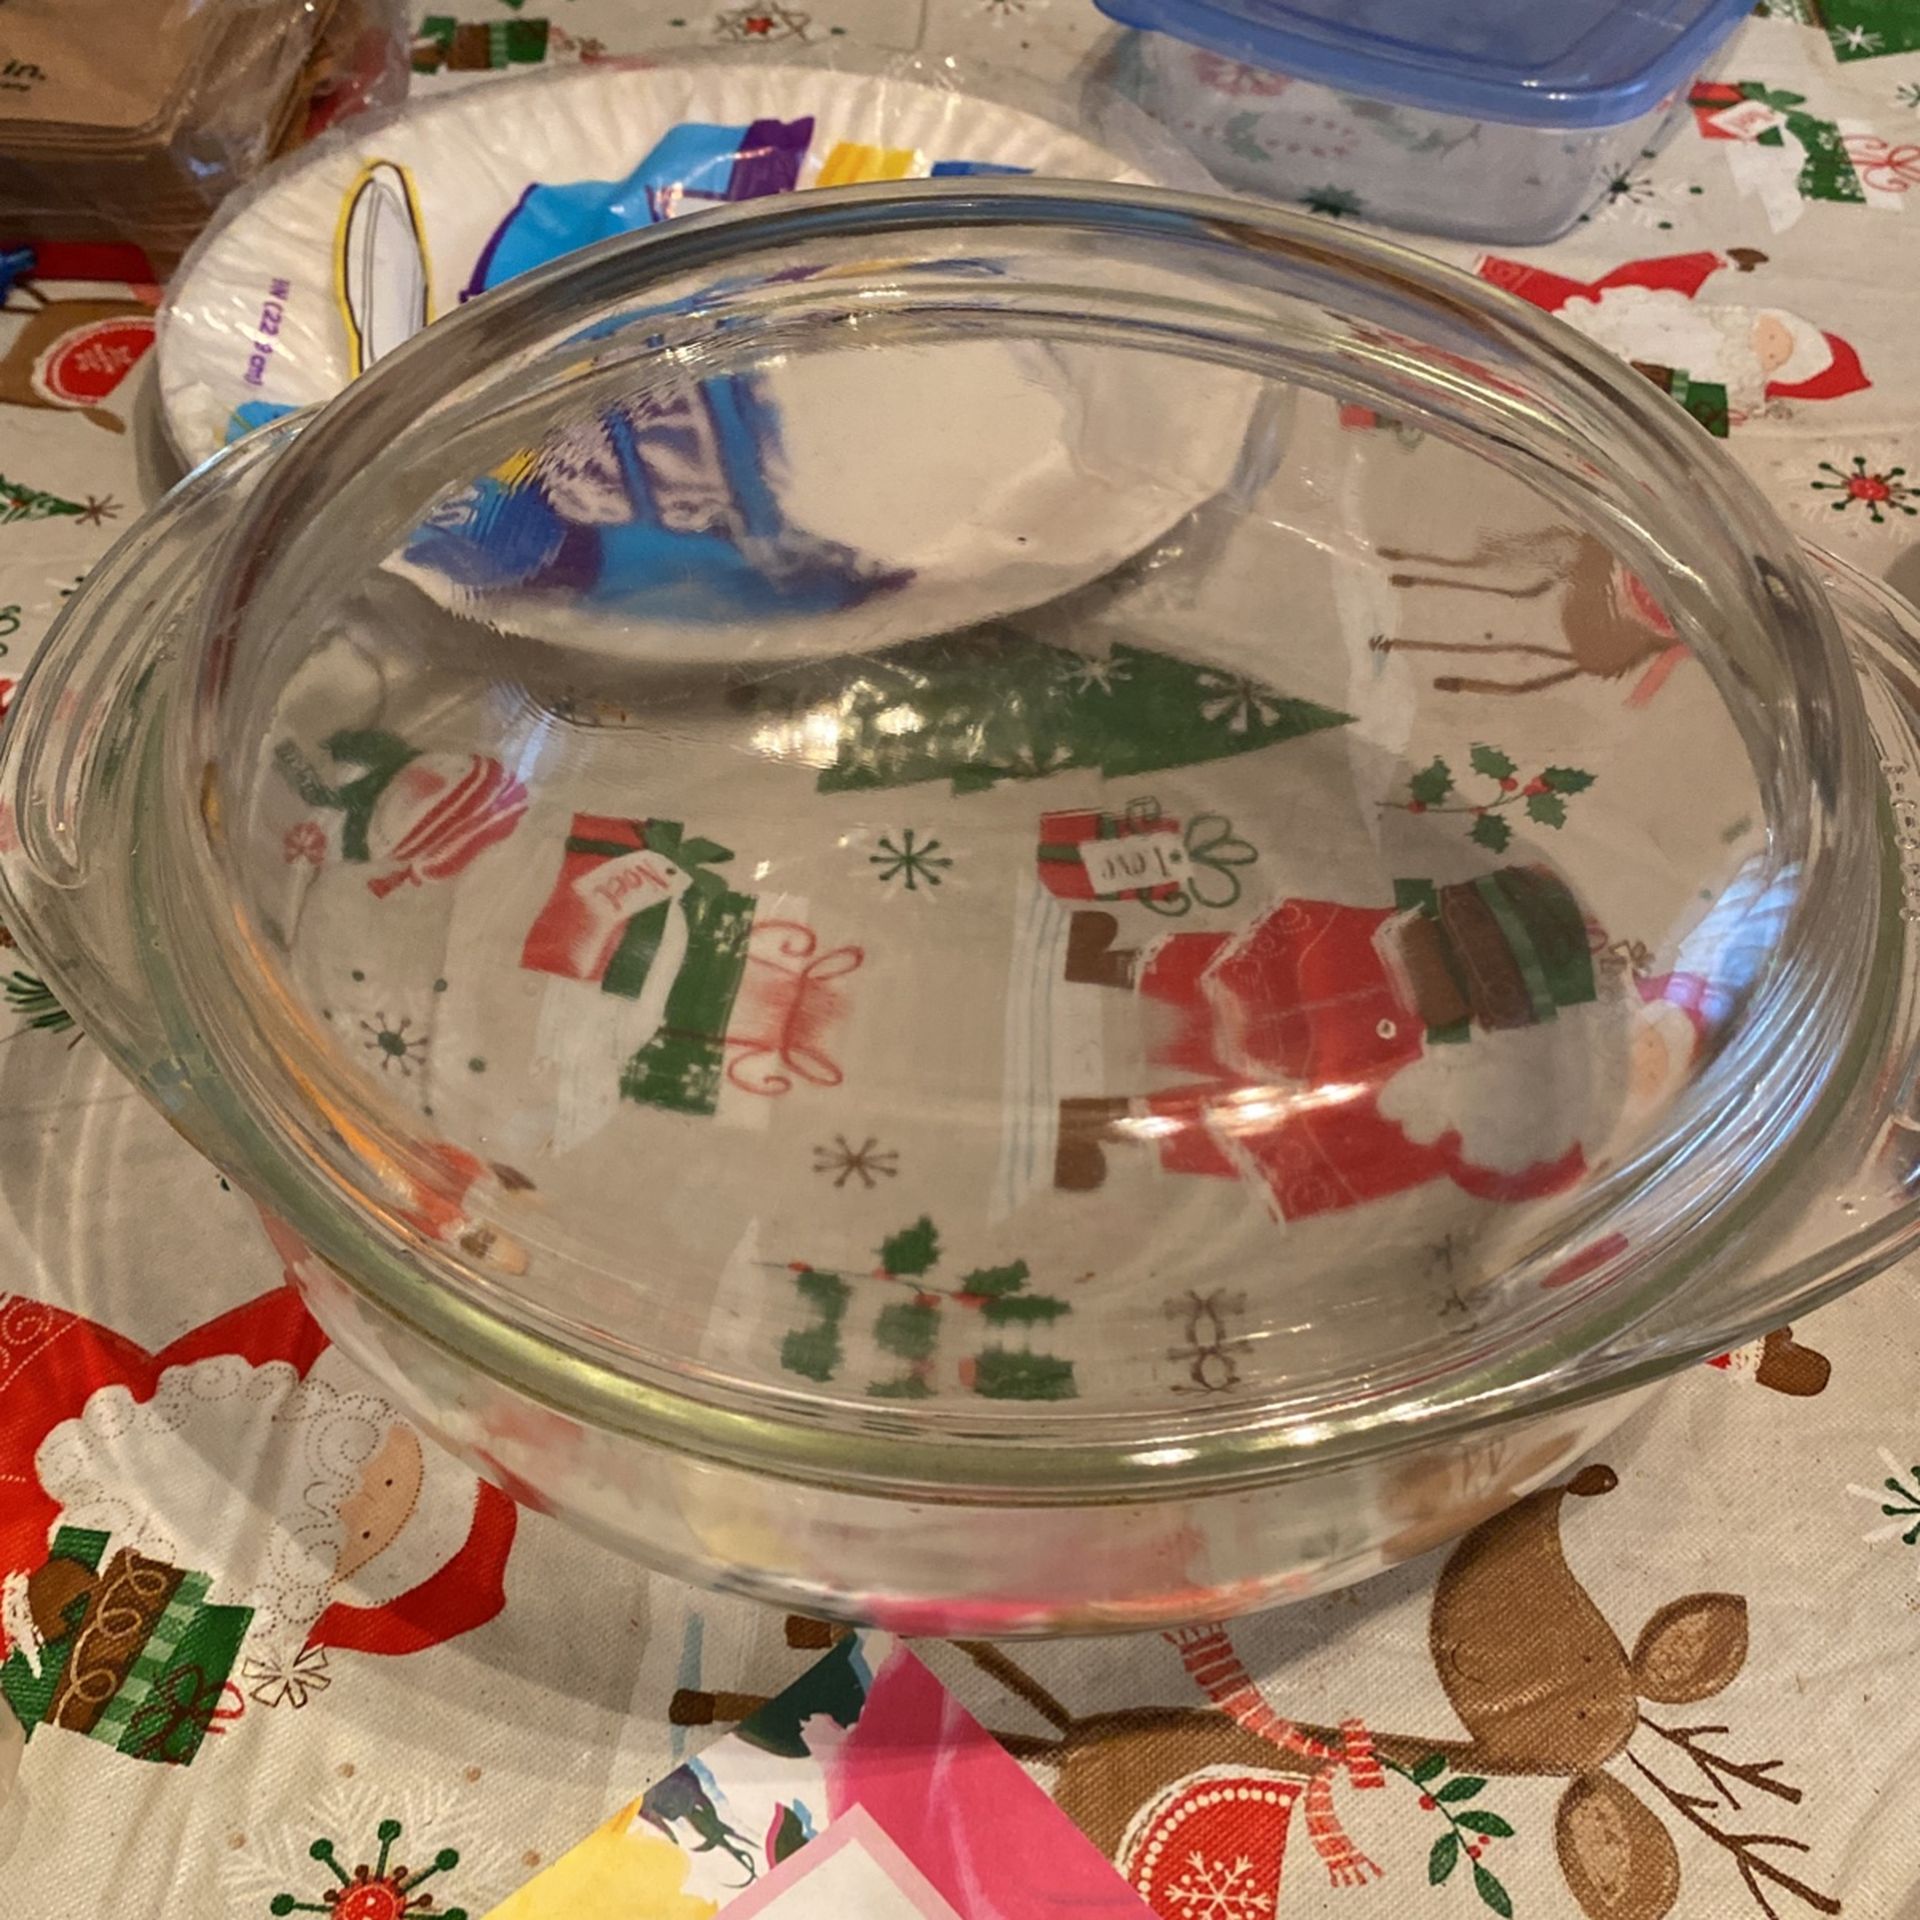 Vintage Pyrex With Lid